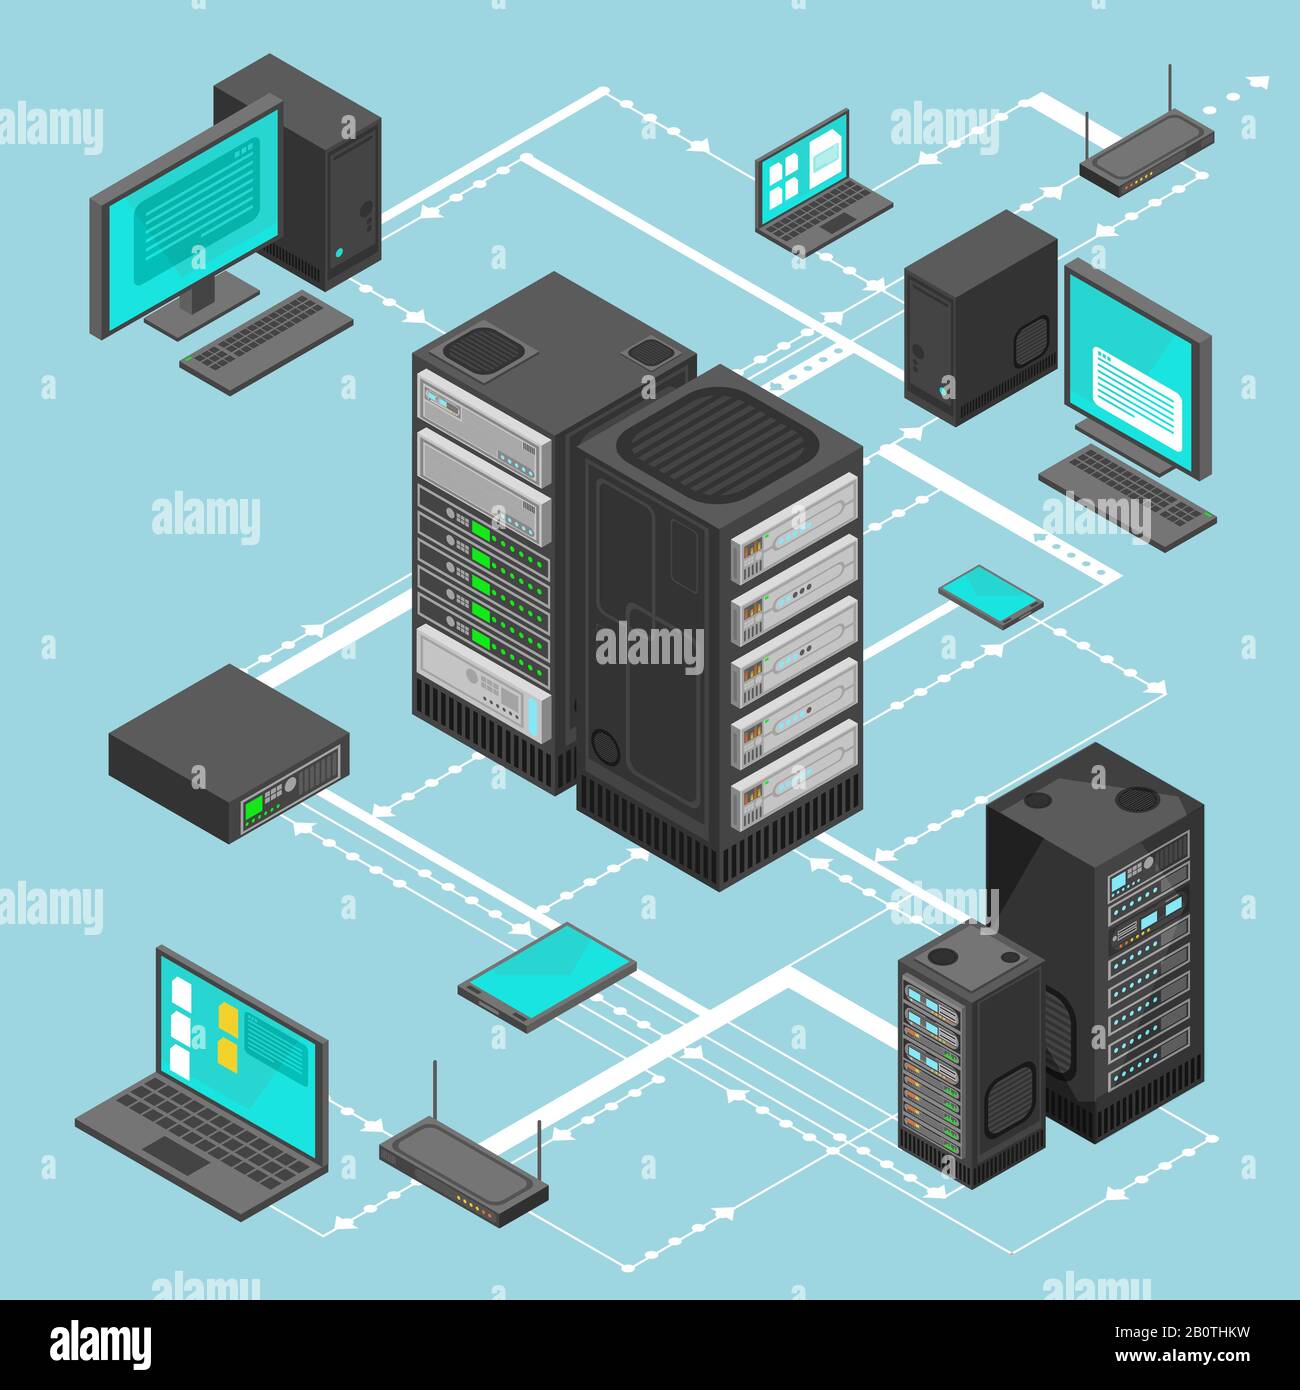 Data network management vector isometric map with business networking servers, computers and device. Server data information map illustration Stock Vector